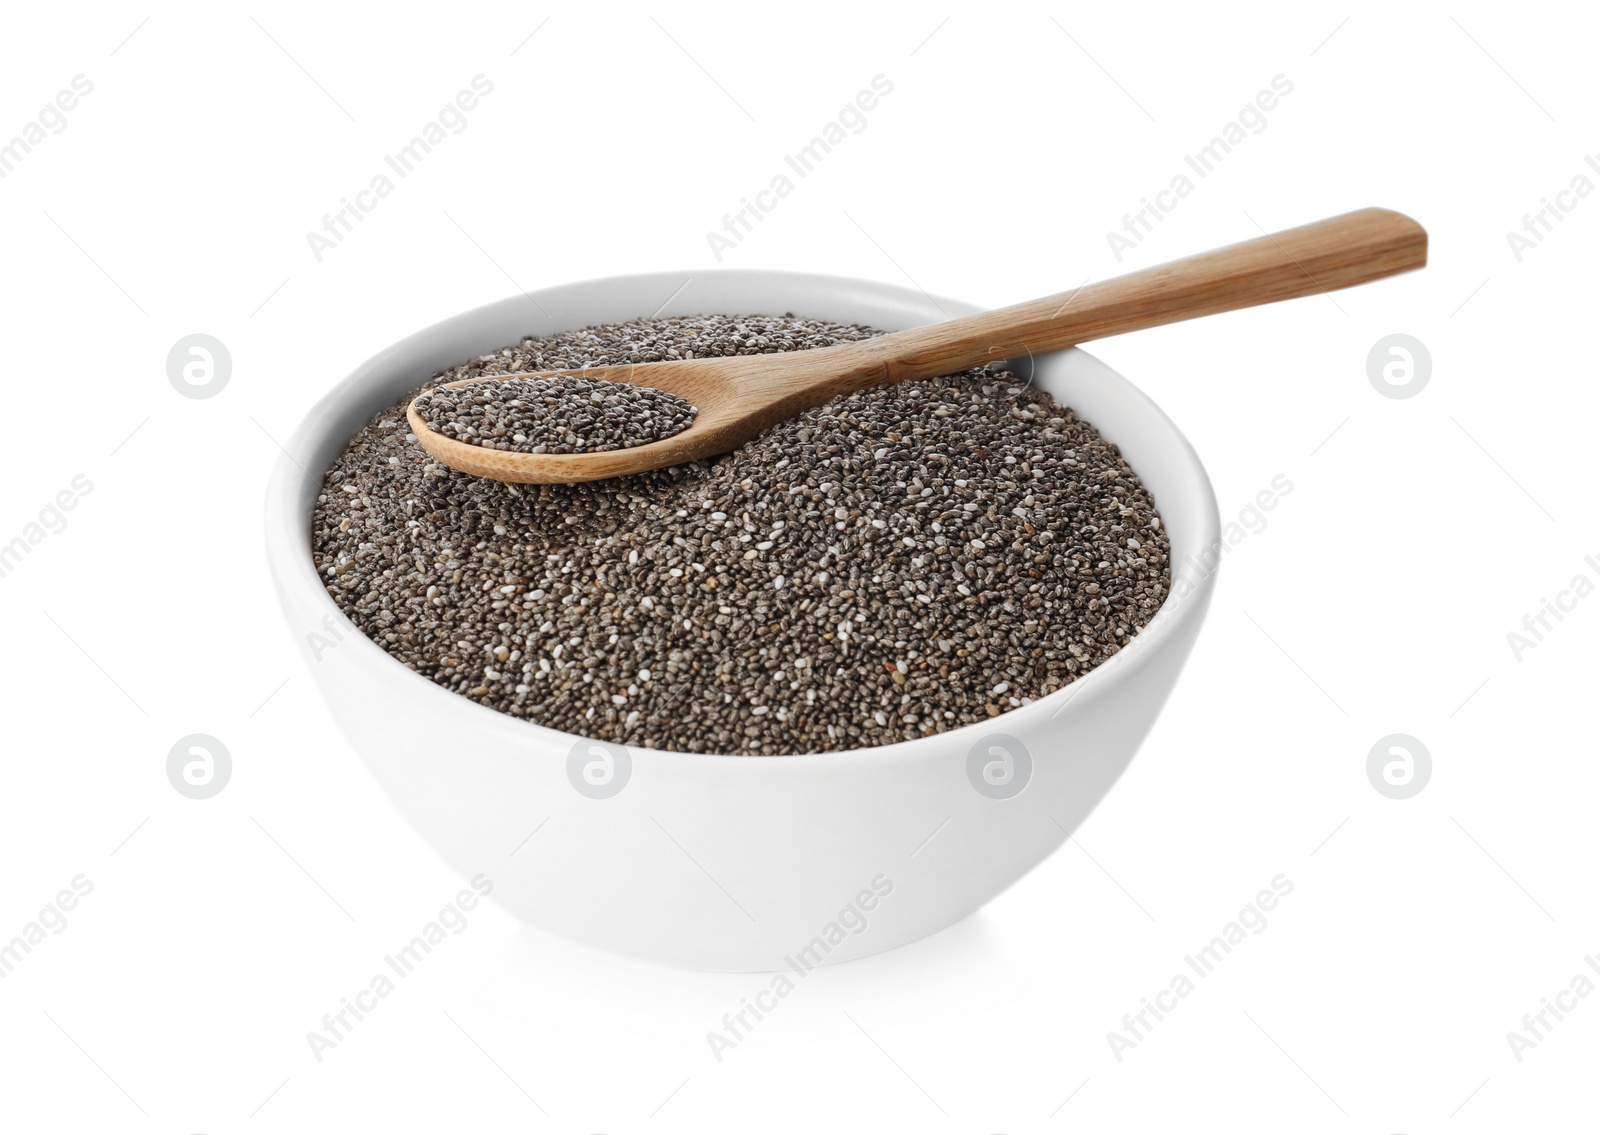 Photo of Chia seeds in bowl with spoon isolated on white